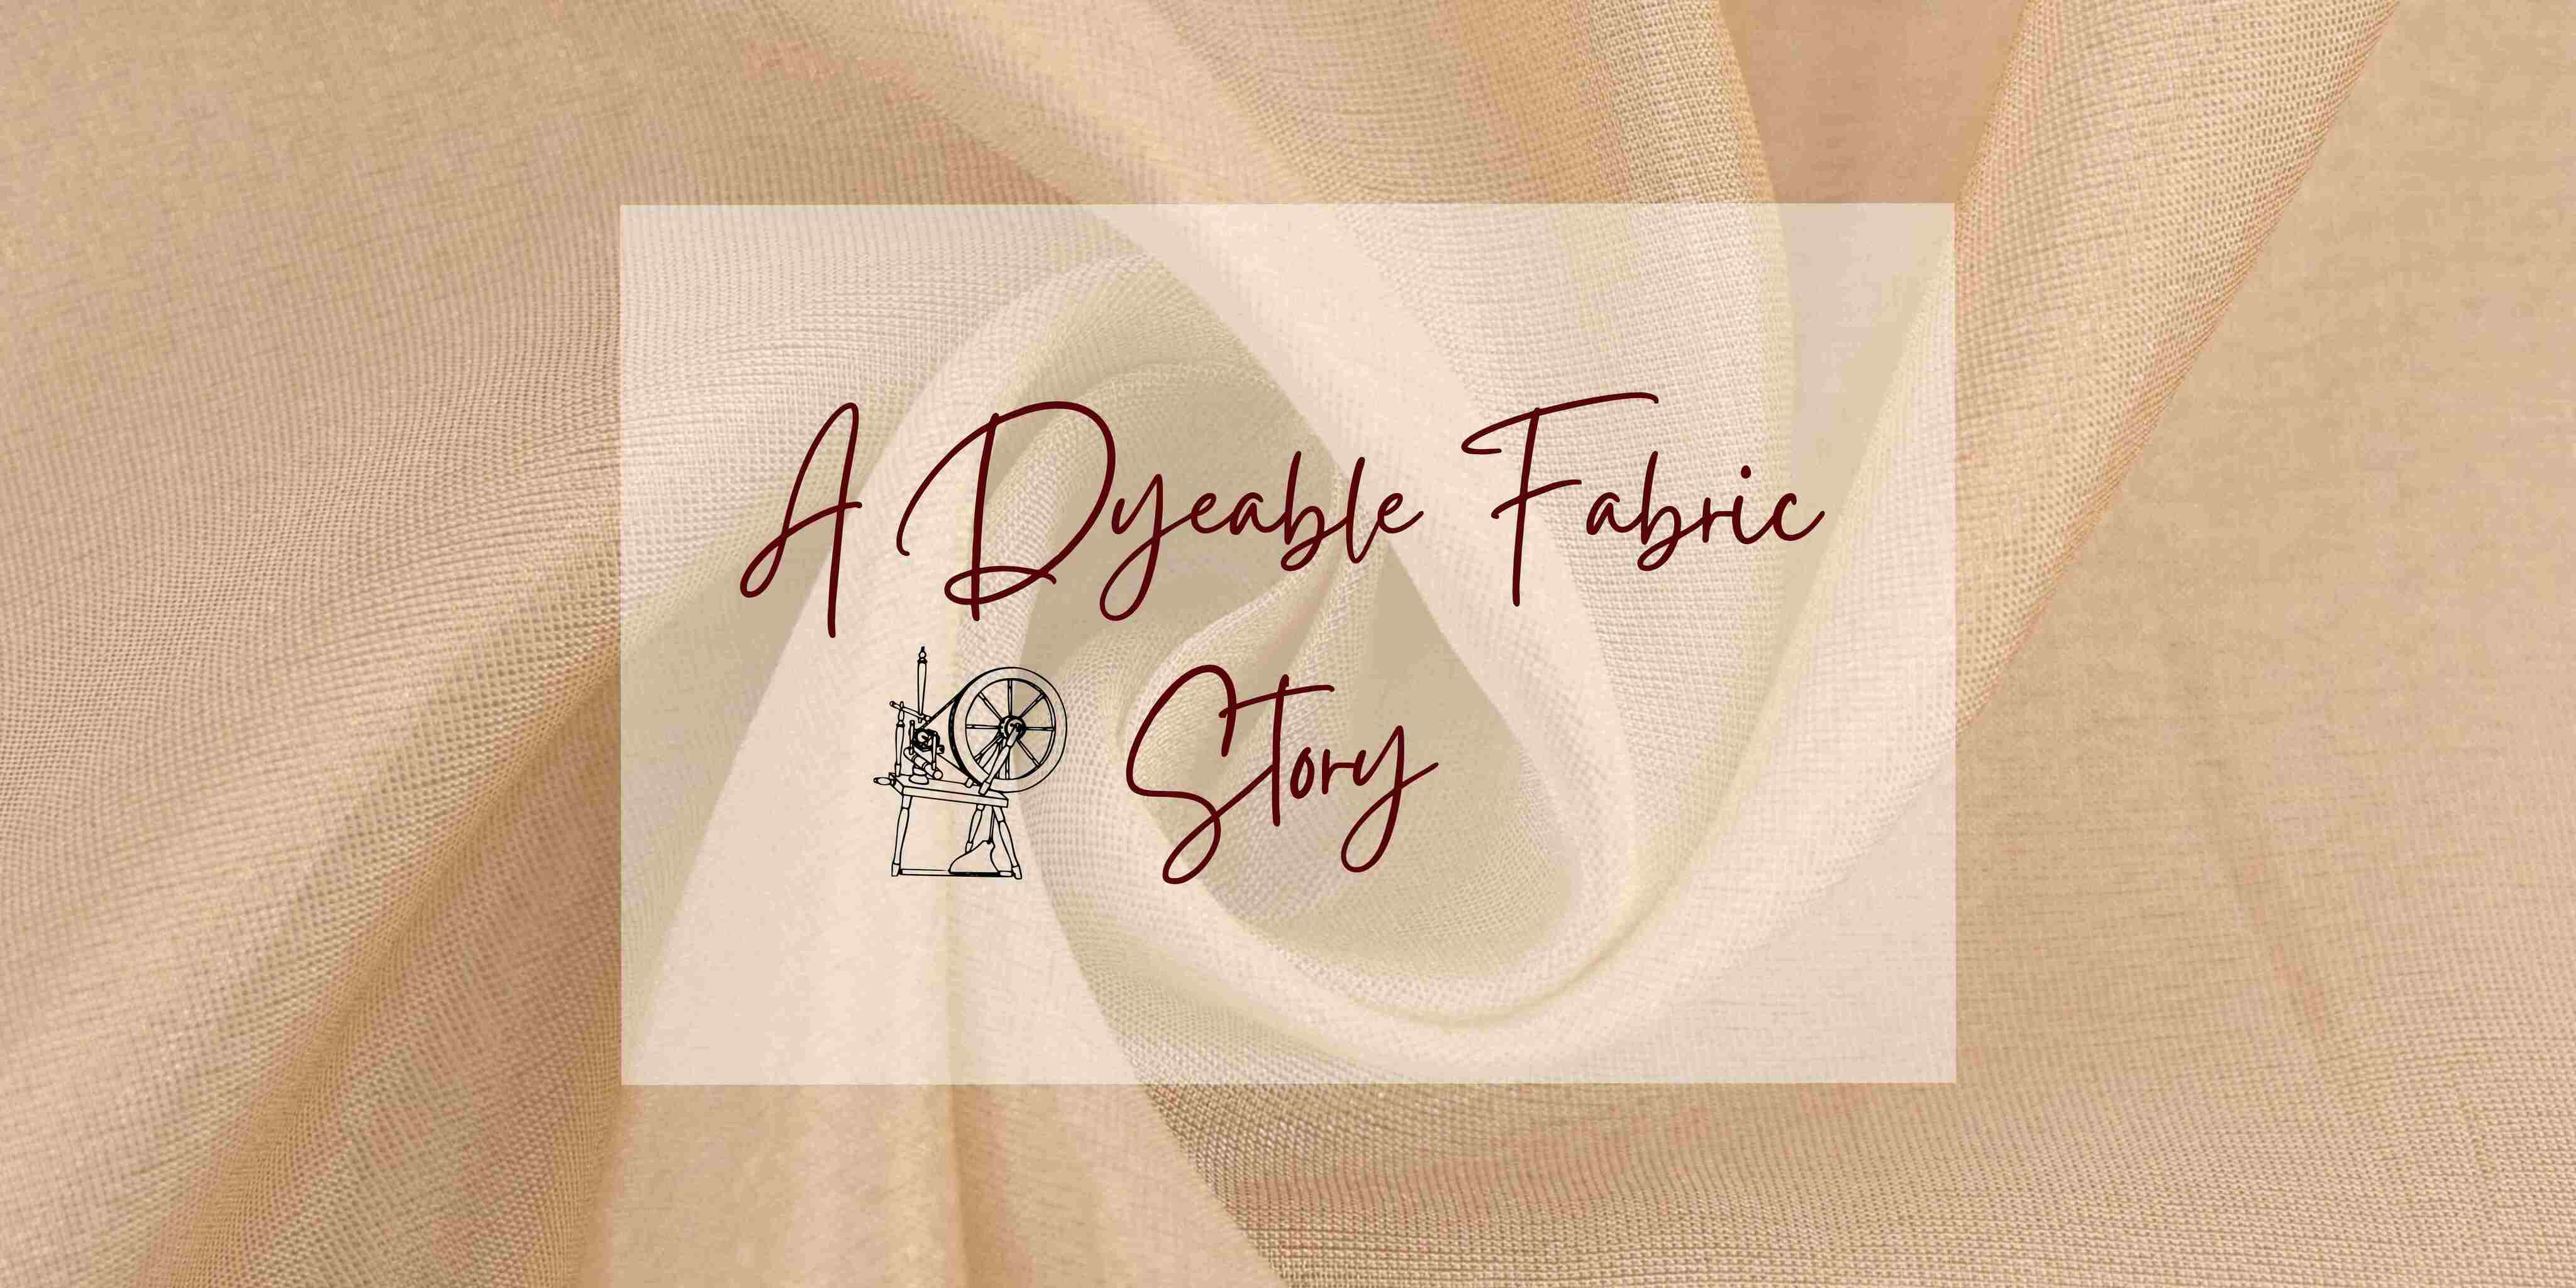 ‘Every Dyeable Fabric has a Story’– A Snippet!